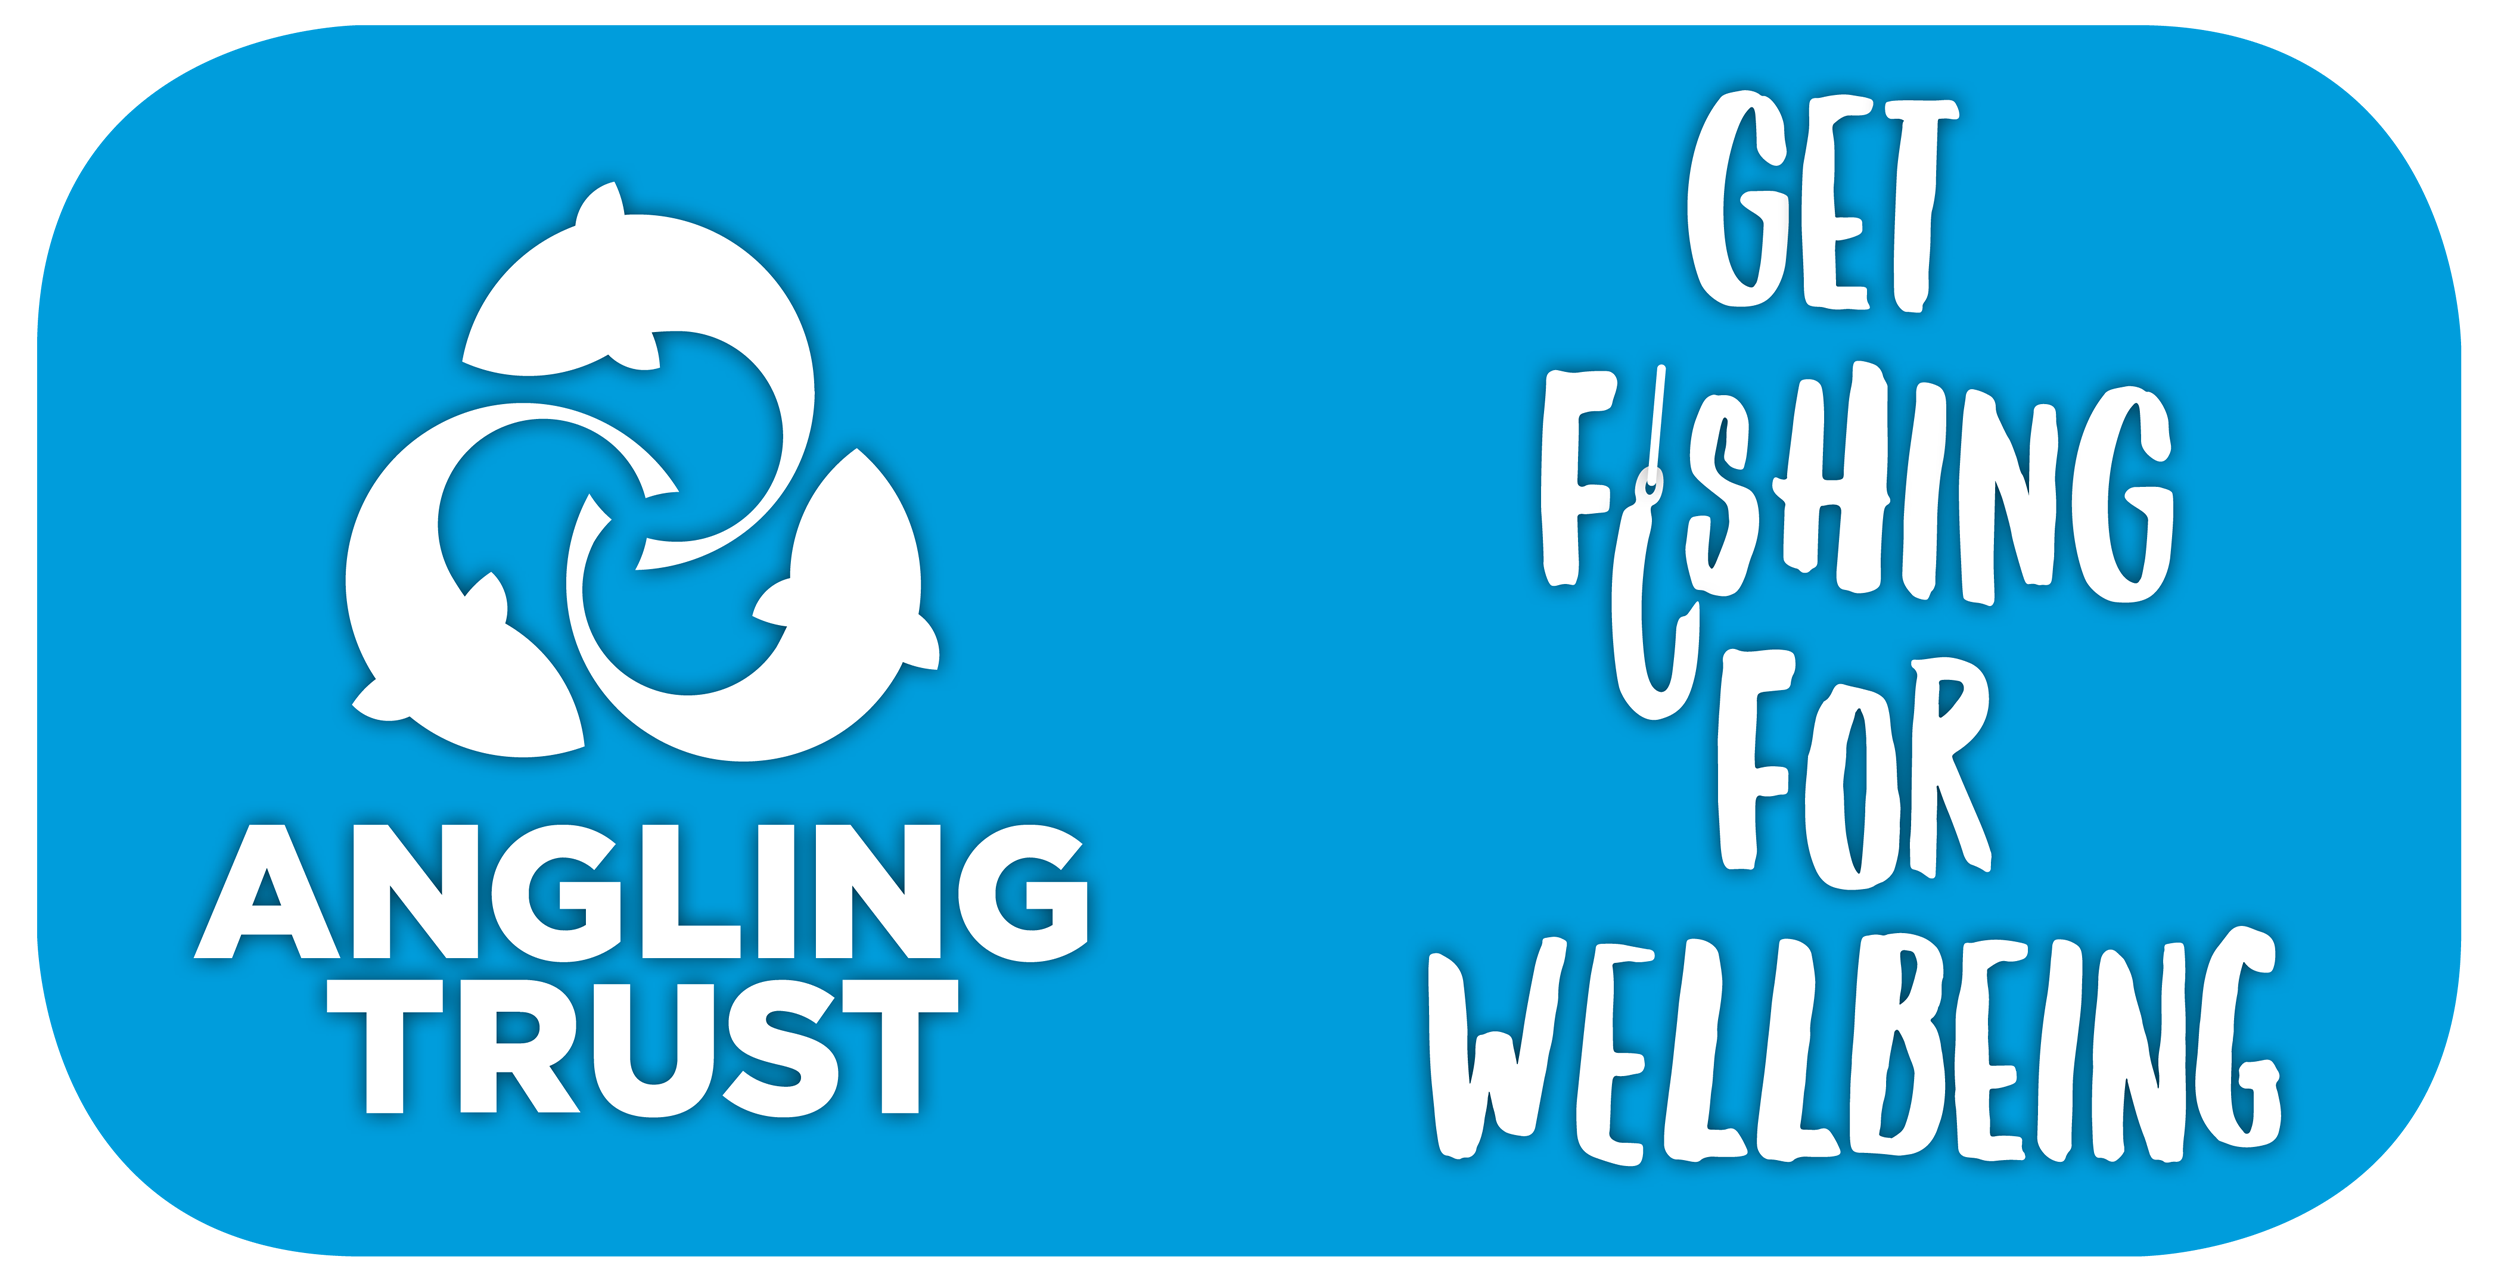 Get Fishing | Get Fishing for Wellbeing